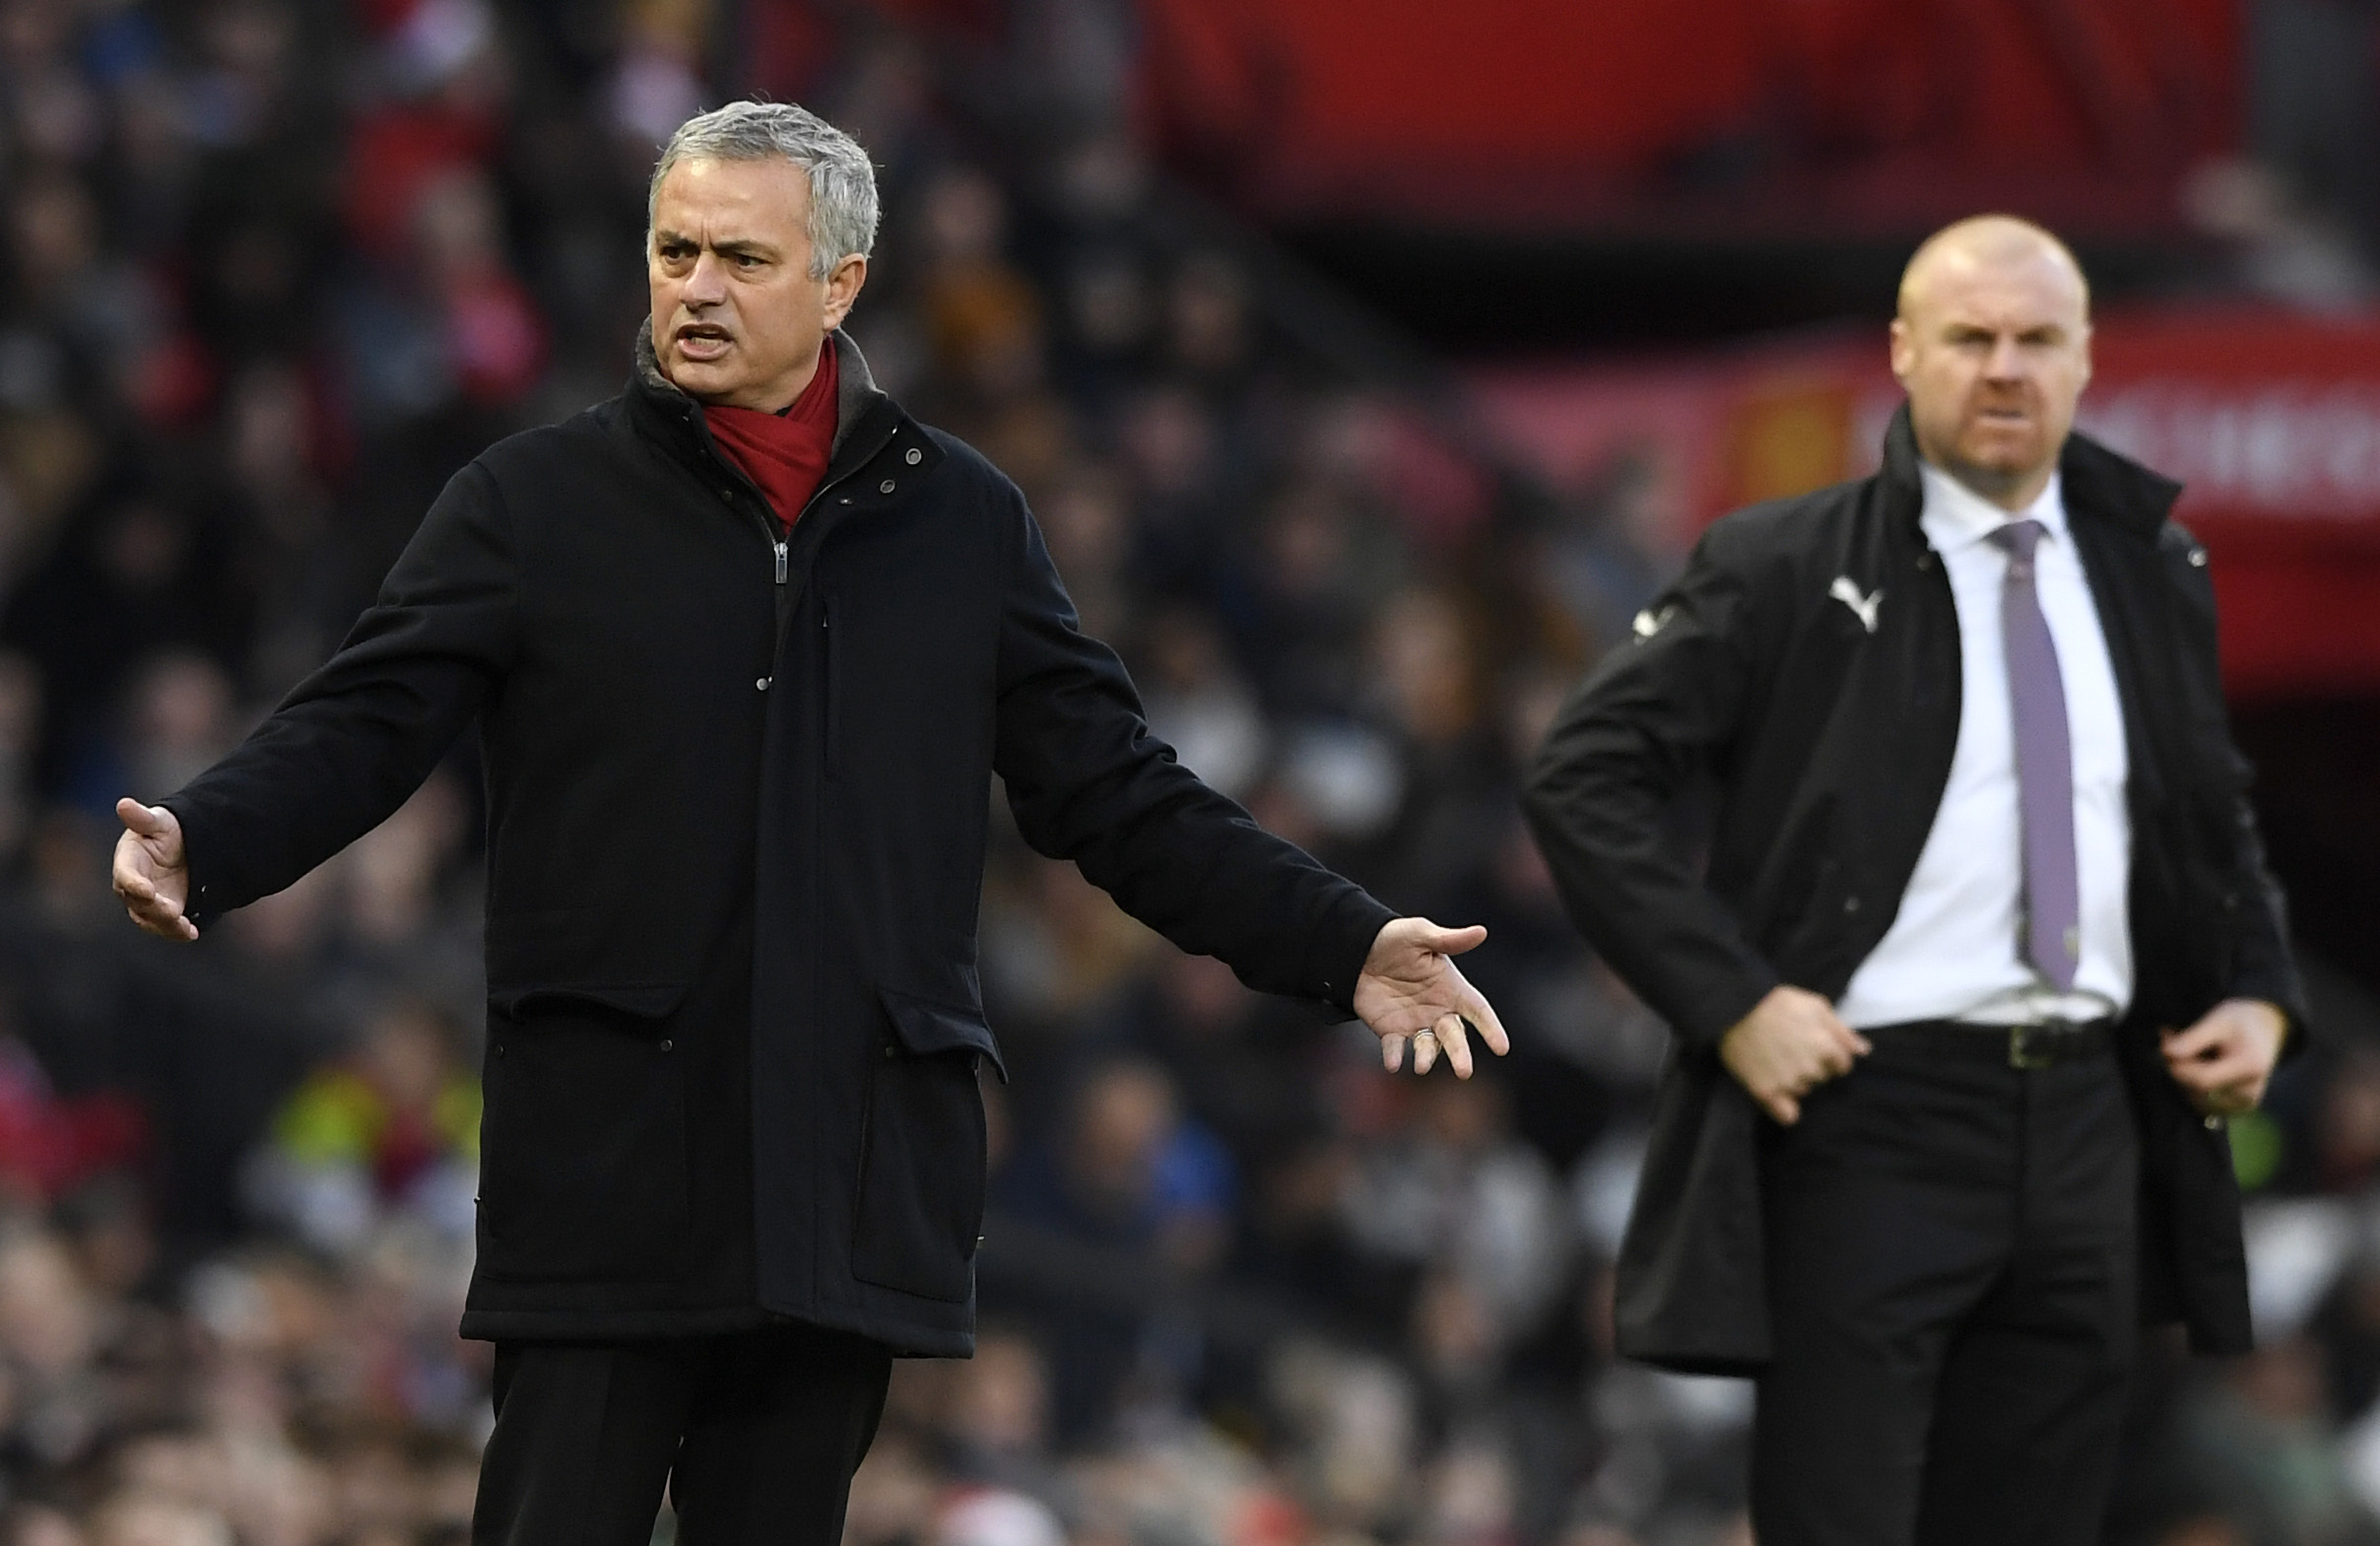 MANCHESTER, ENGLAND - DECEMBER 26:  Jose Mourinho, Manager of Manchester United looks reacts as Sean Dyche, Manager of Burnley looks on during the Premier League match between Manchester United and Burnley at Old Trafford on December 26, 2017 in Manchester, England.  (Photo by Stu Forster/Getty Images)